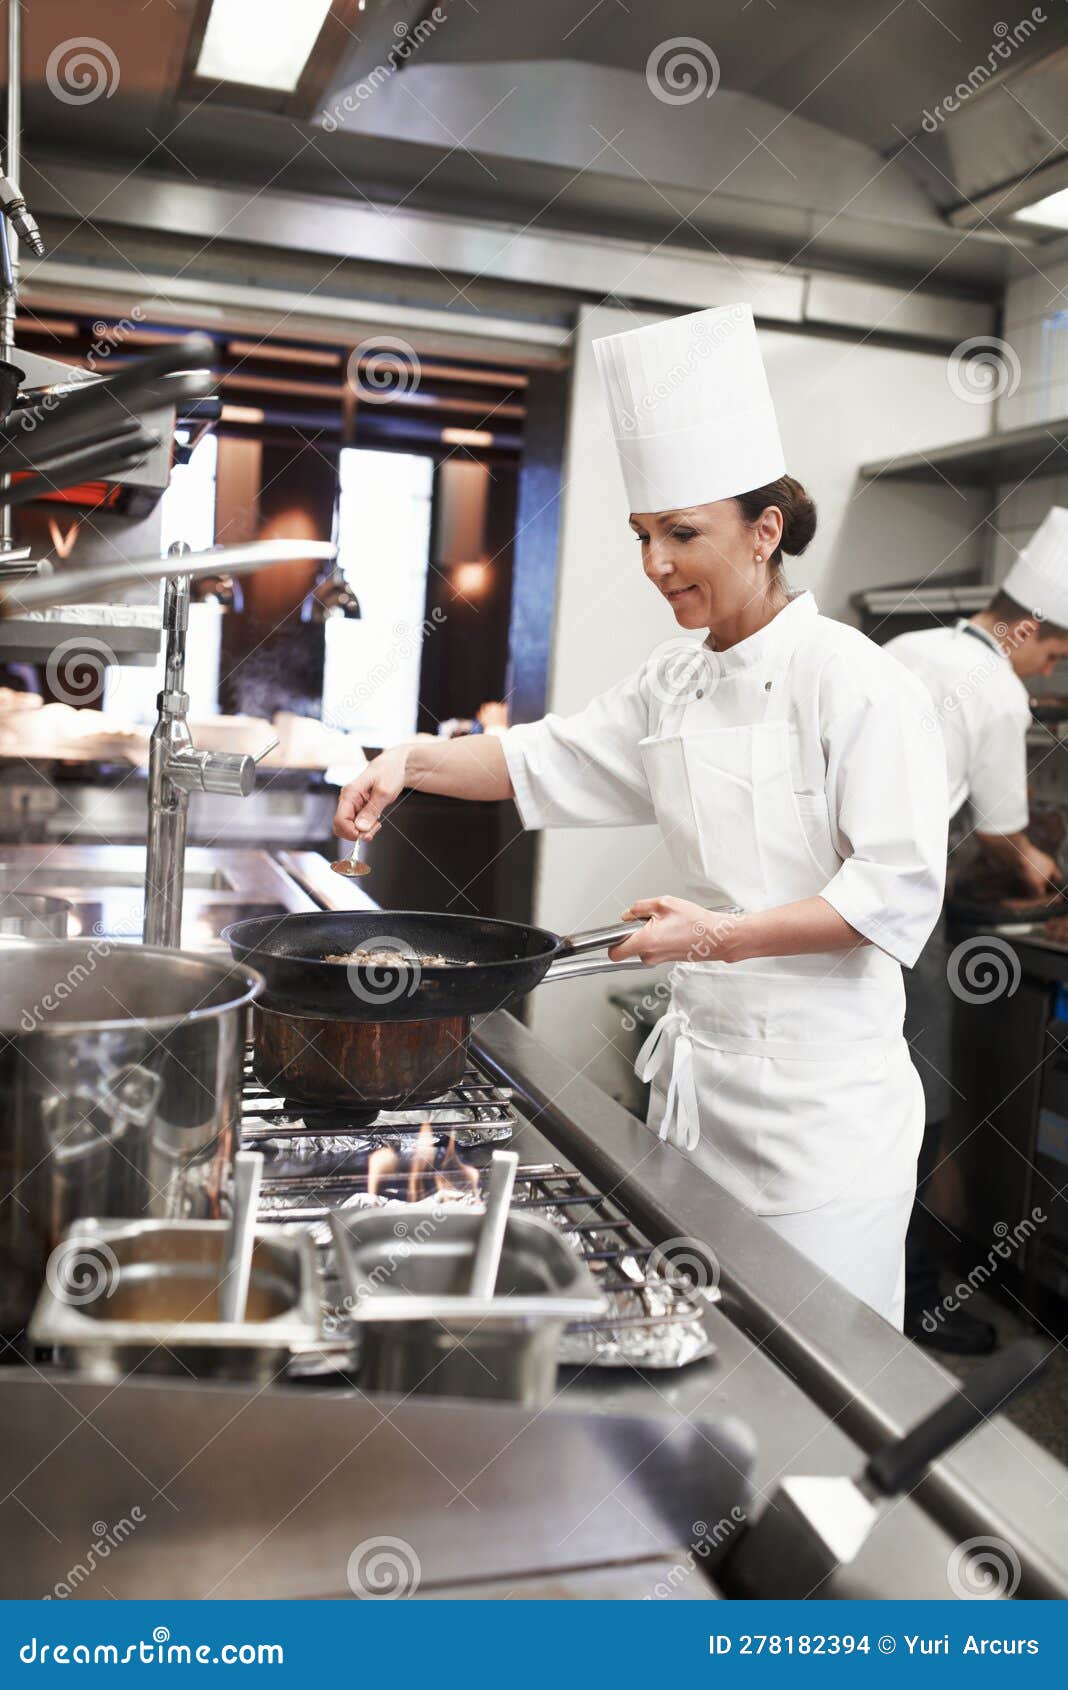 chef, woman and frying pan with sauce in restaurant kitchen, catering service and prepare food for fine dining